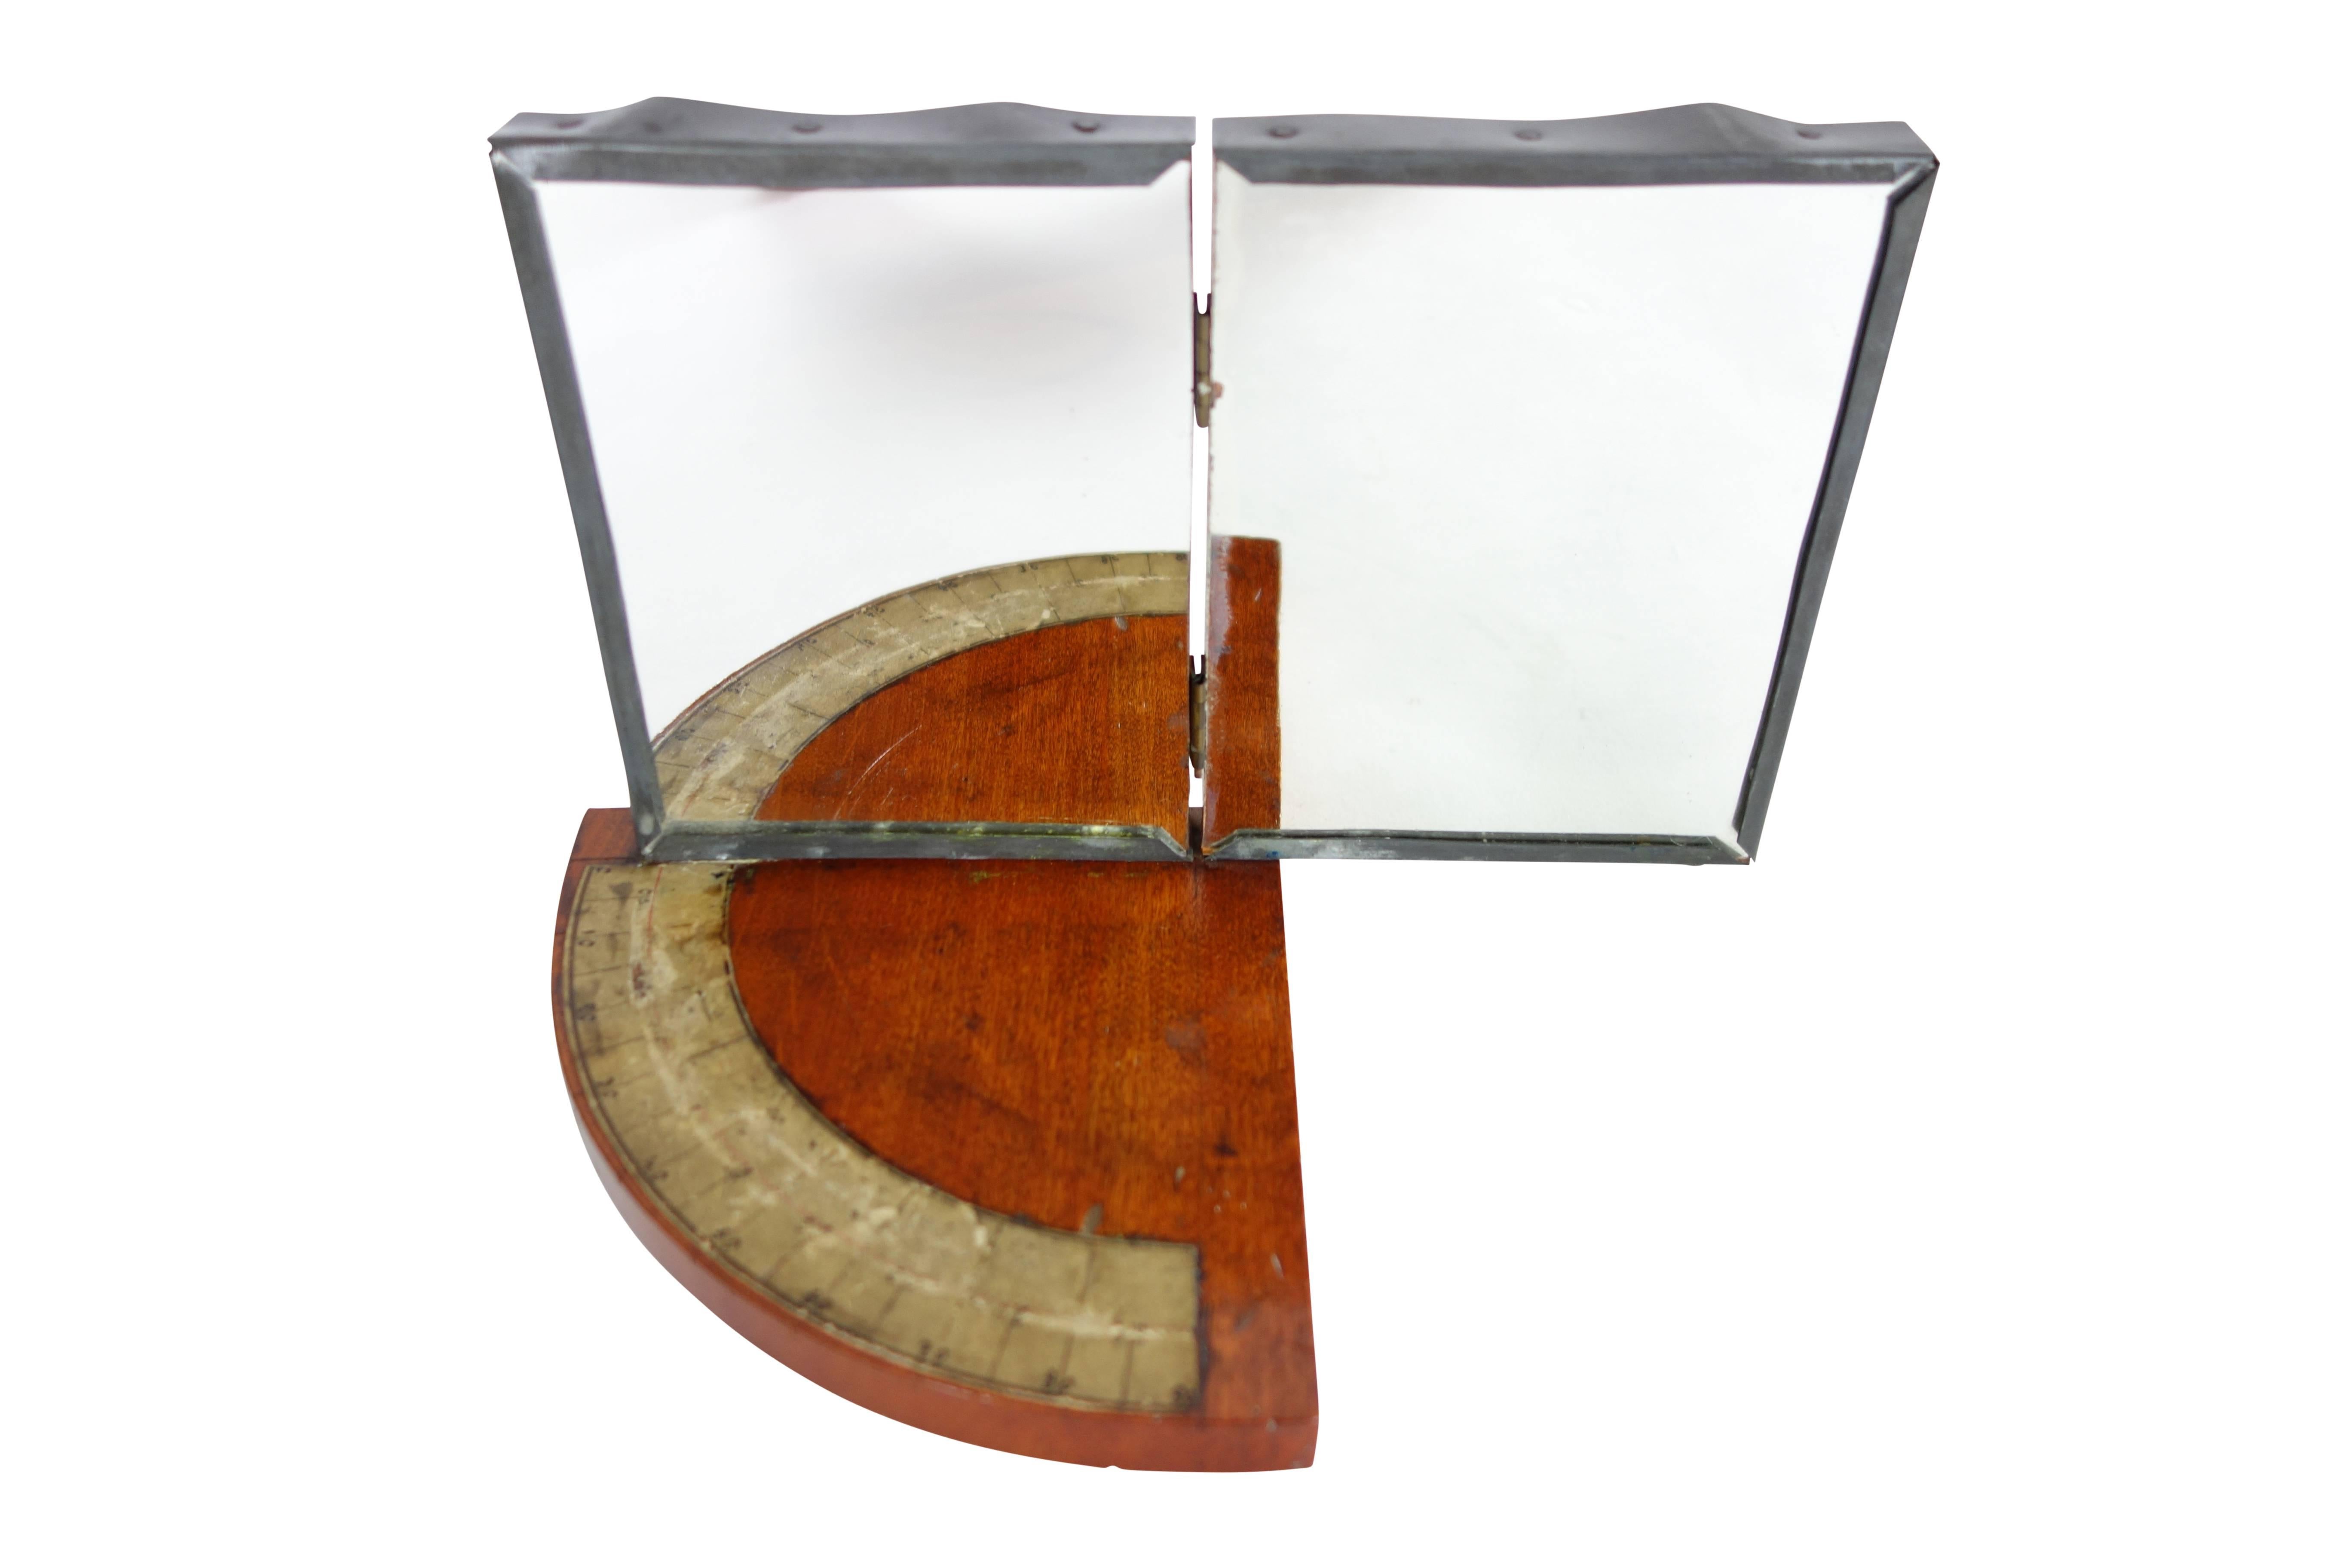 This is a fantastic and rare 19th century physics instrument used to measure the angle of light being reflected in the mirrors. One mirror is stationary, the other is on hinges allowing you to move it from a completely closed position to open. On